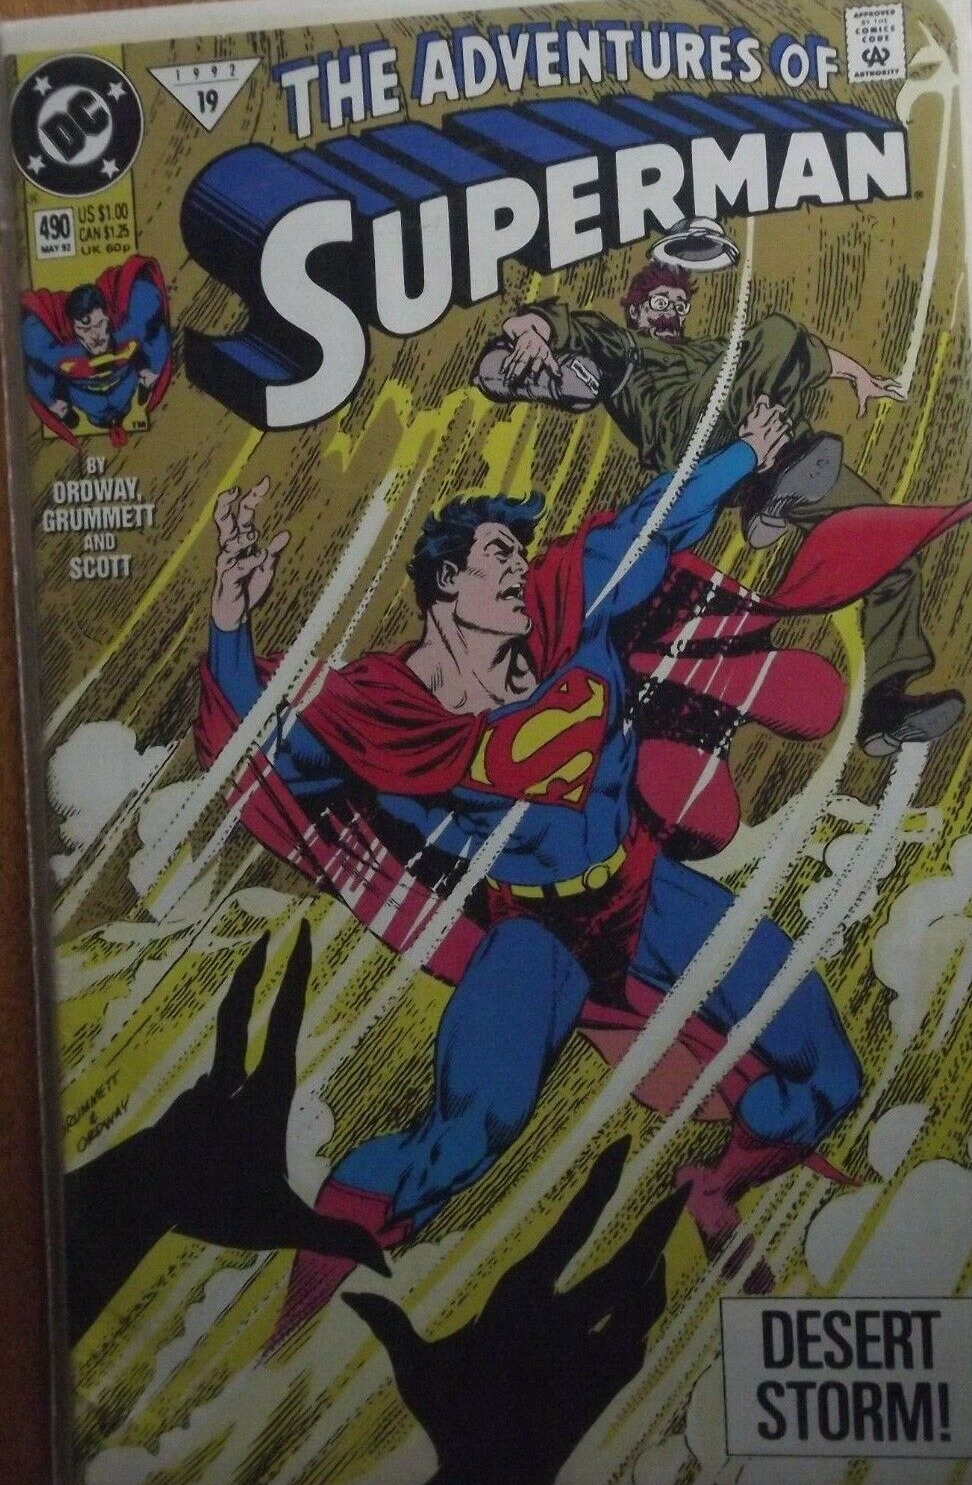 The Adventures of Superman # 490